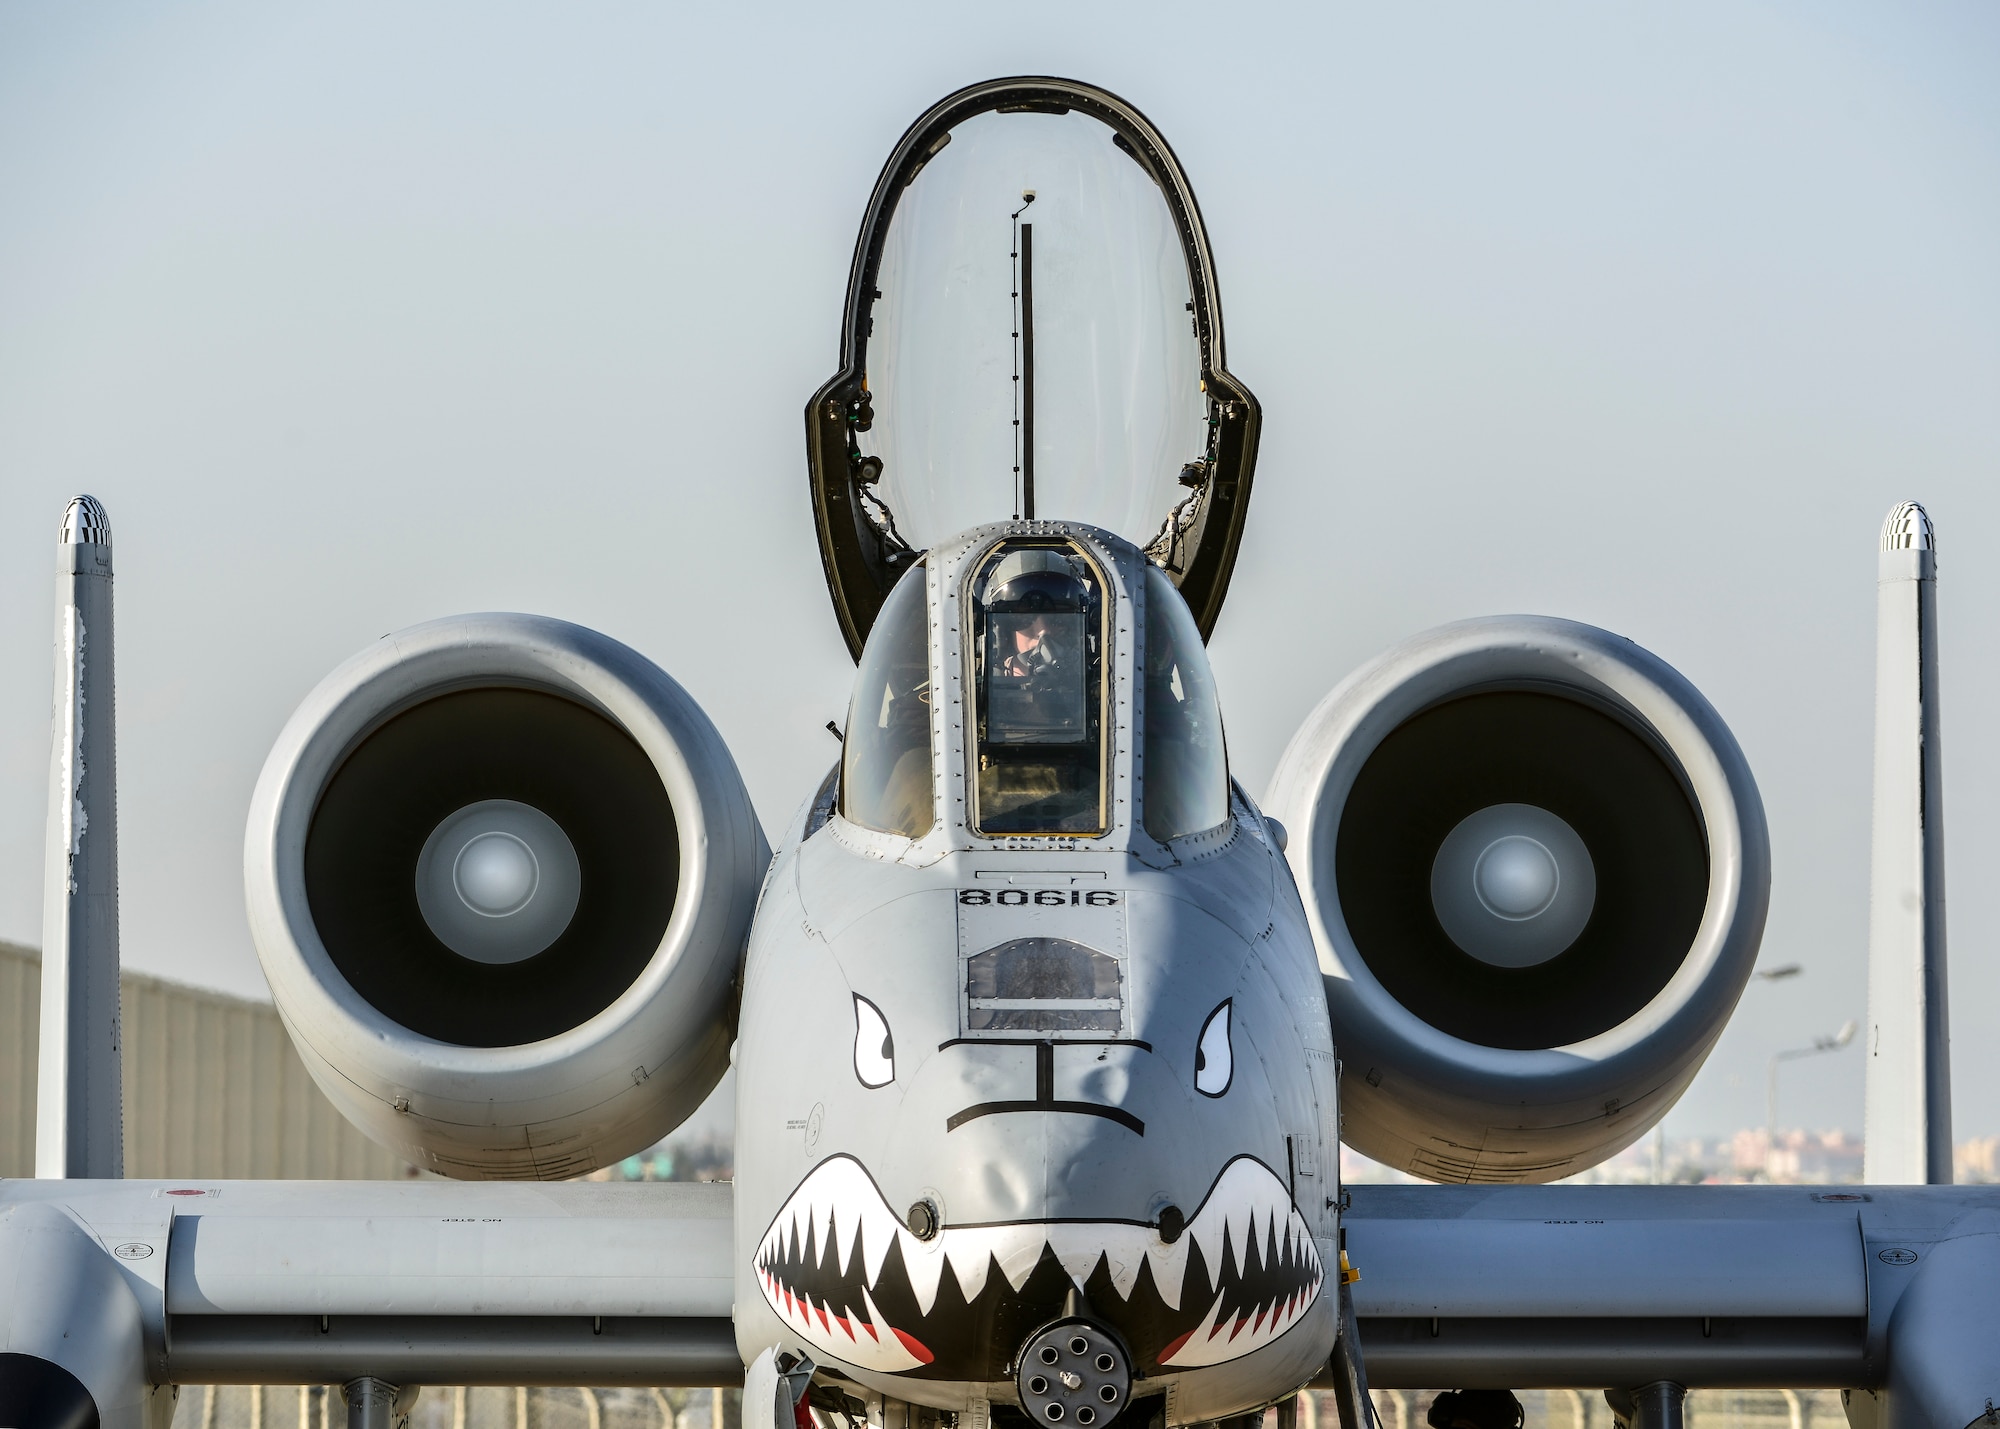 The U.S. Air Force deployed 12 A-10C Thunderbolt II attack aircraft from Moody Air Force Base, Georgia, support equipment and approximately 300 personnel to Incirlik Air Base, Turkey in support of Operation Inherent Resolve Oct. 15, 2015. This deployment follows Turkey's recent decision to open its bases to U.S. and other Coalition members participating in air operations against ISIL. Turkey is a NATO ally, close friend of the United States, and an important partner in the international Coalition against ISIL. (U.S. Air Force photo by Airman 1st Class Cory W. Bush/Released)